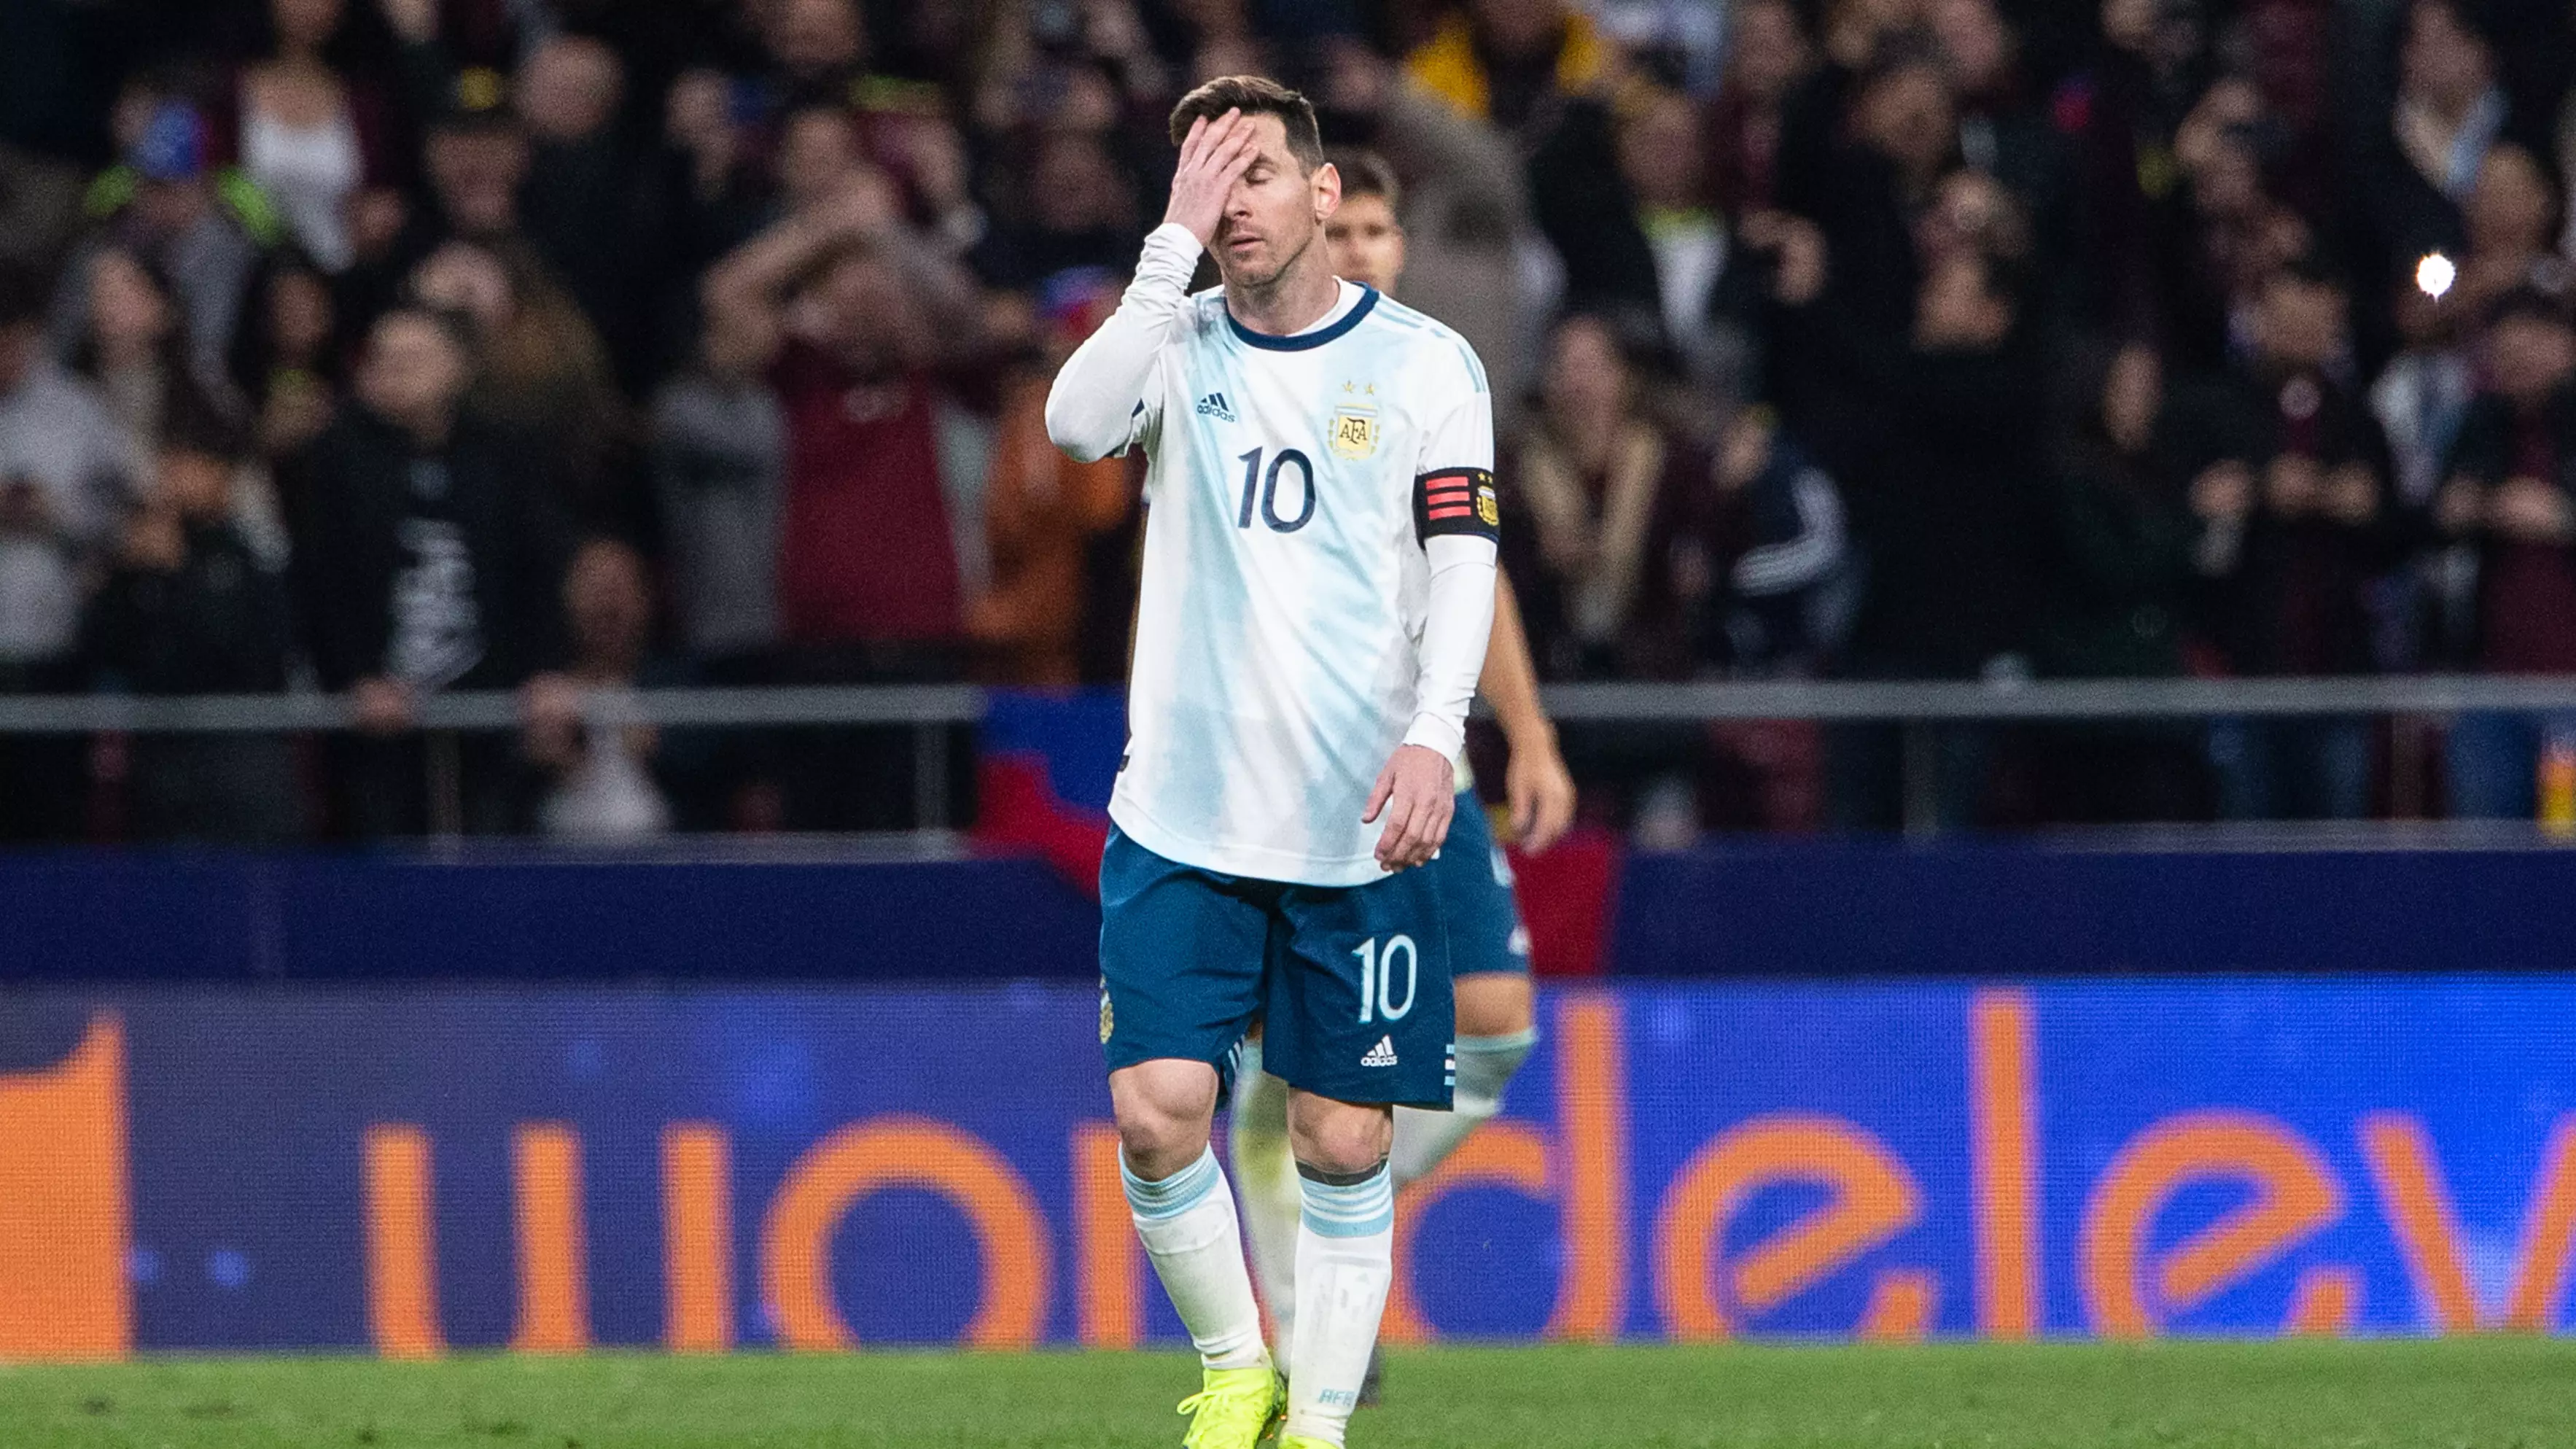 Lionel Messi Reveals His Son Asked Why The Press In Argentina Is 'Killing' Him